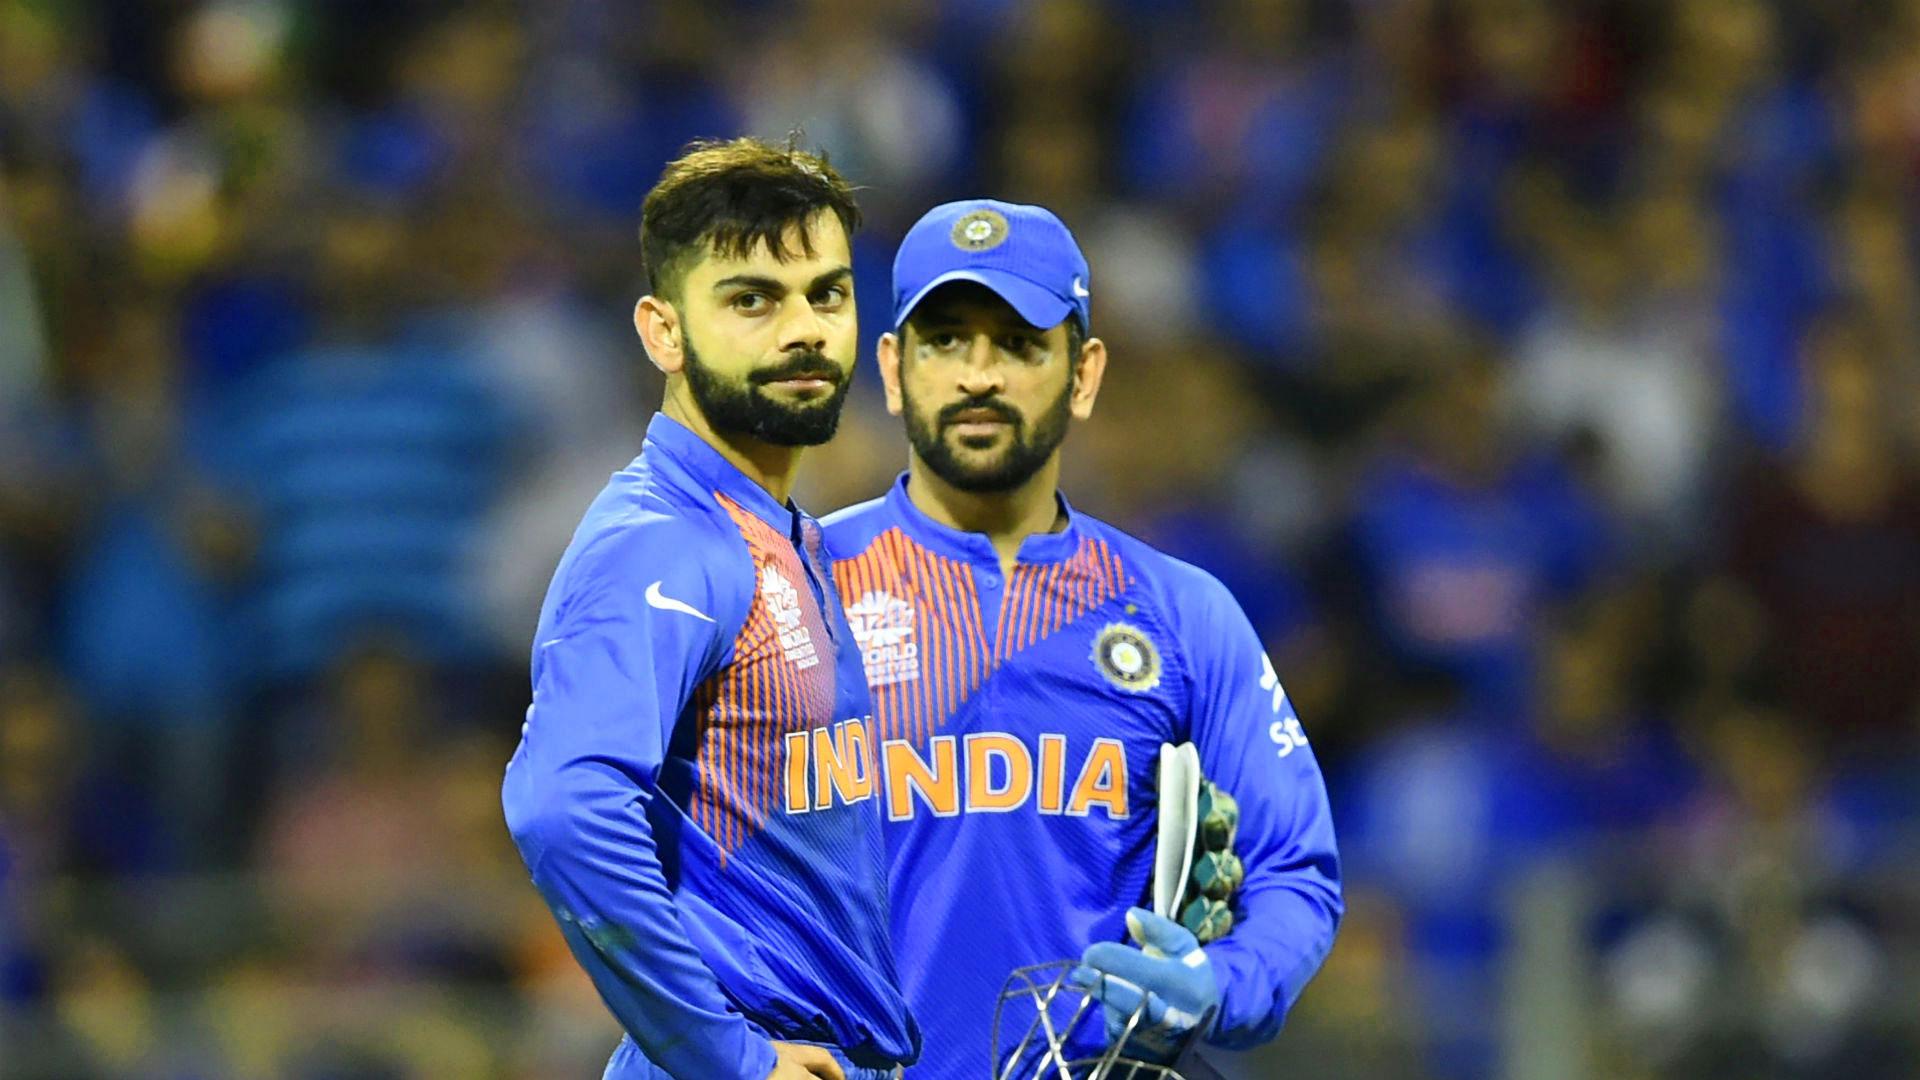 Indian Cricket Team 2019 Wallpapers - Wallpaper Cave